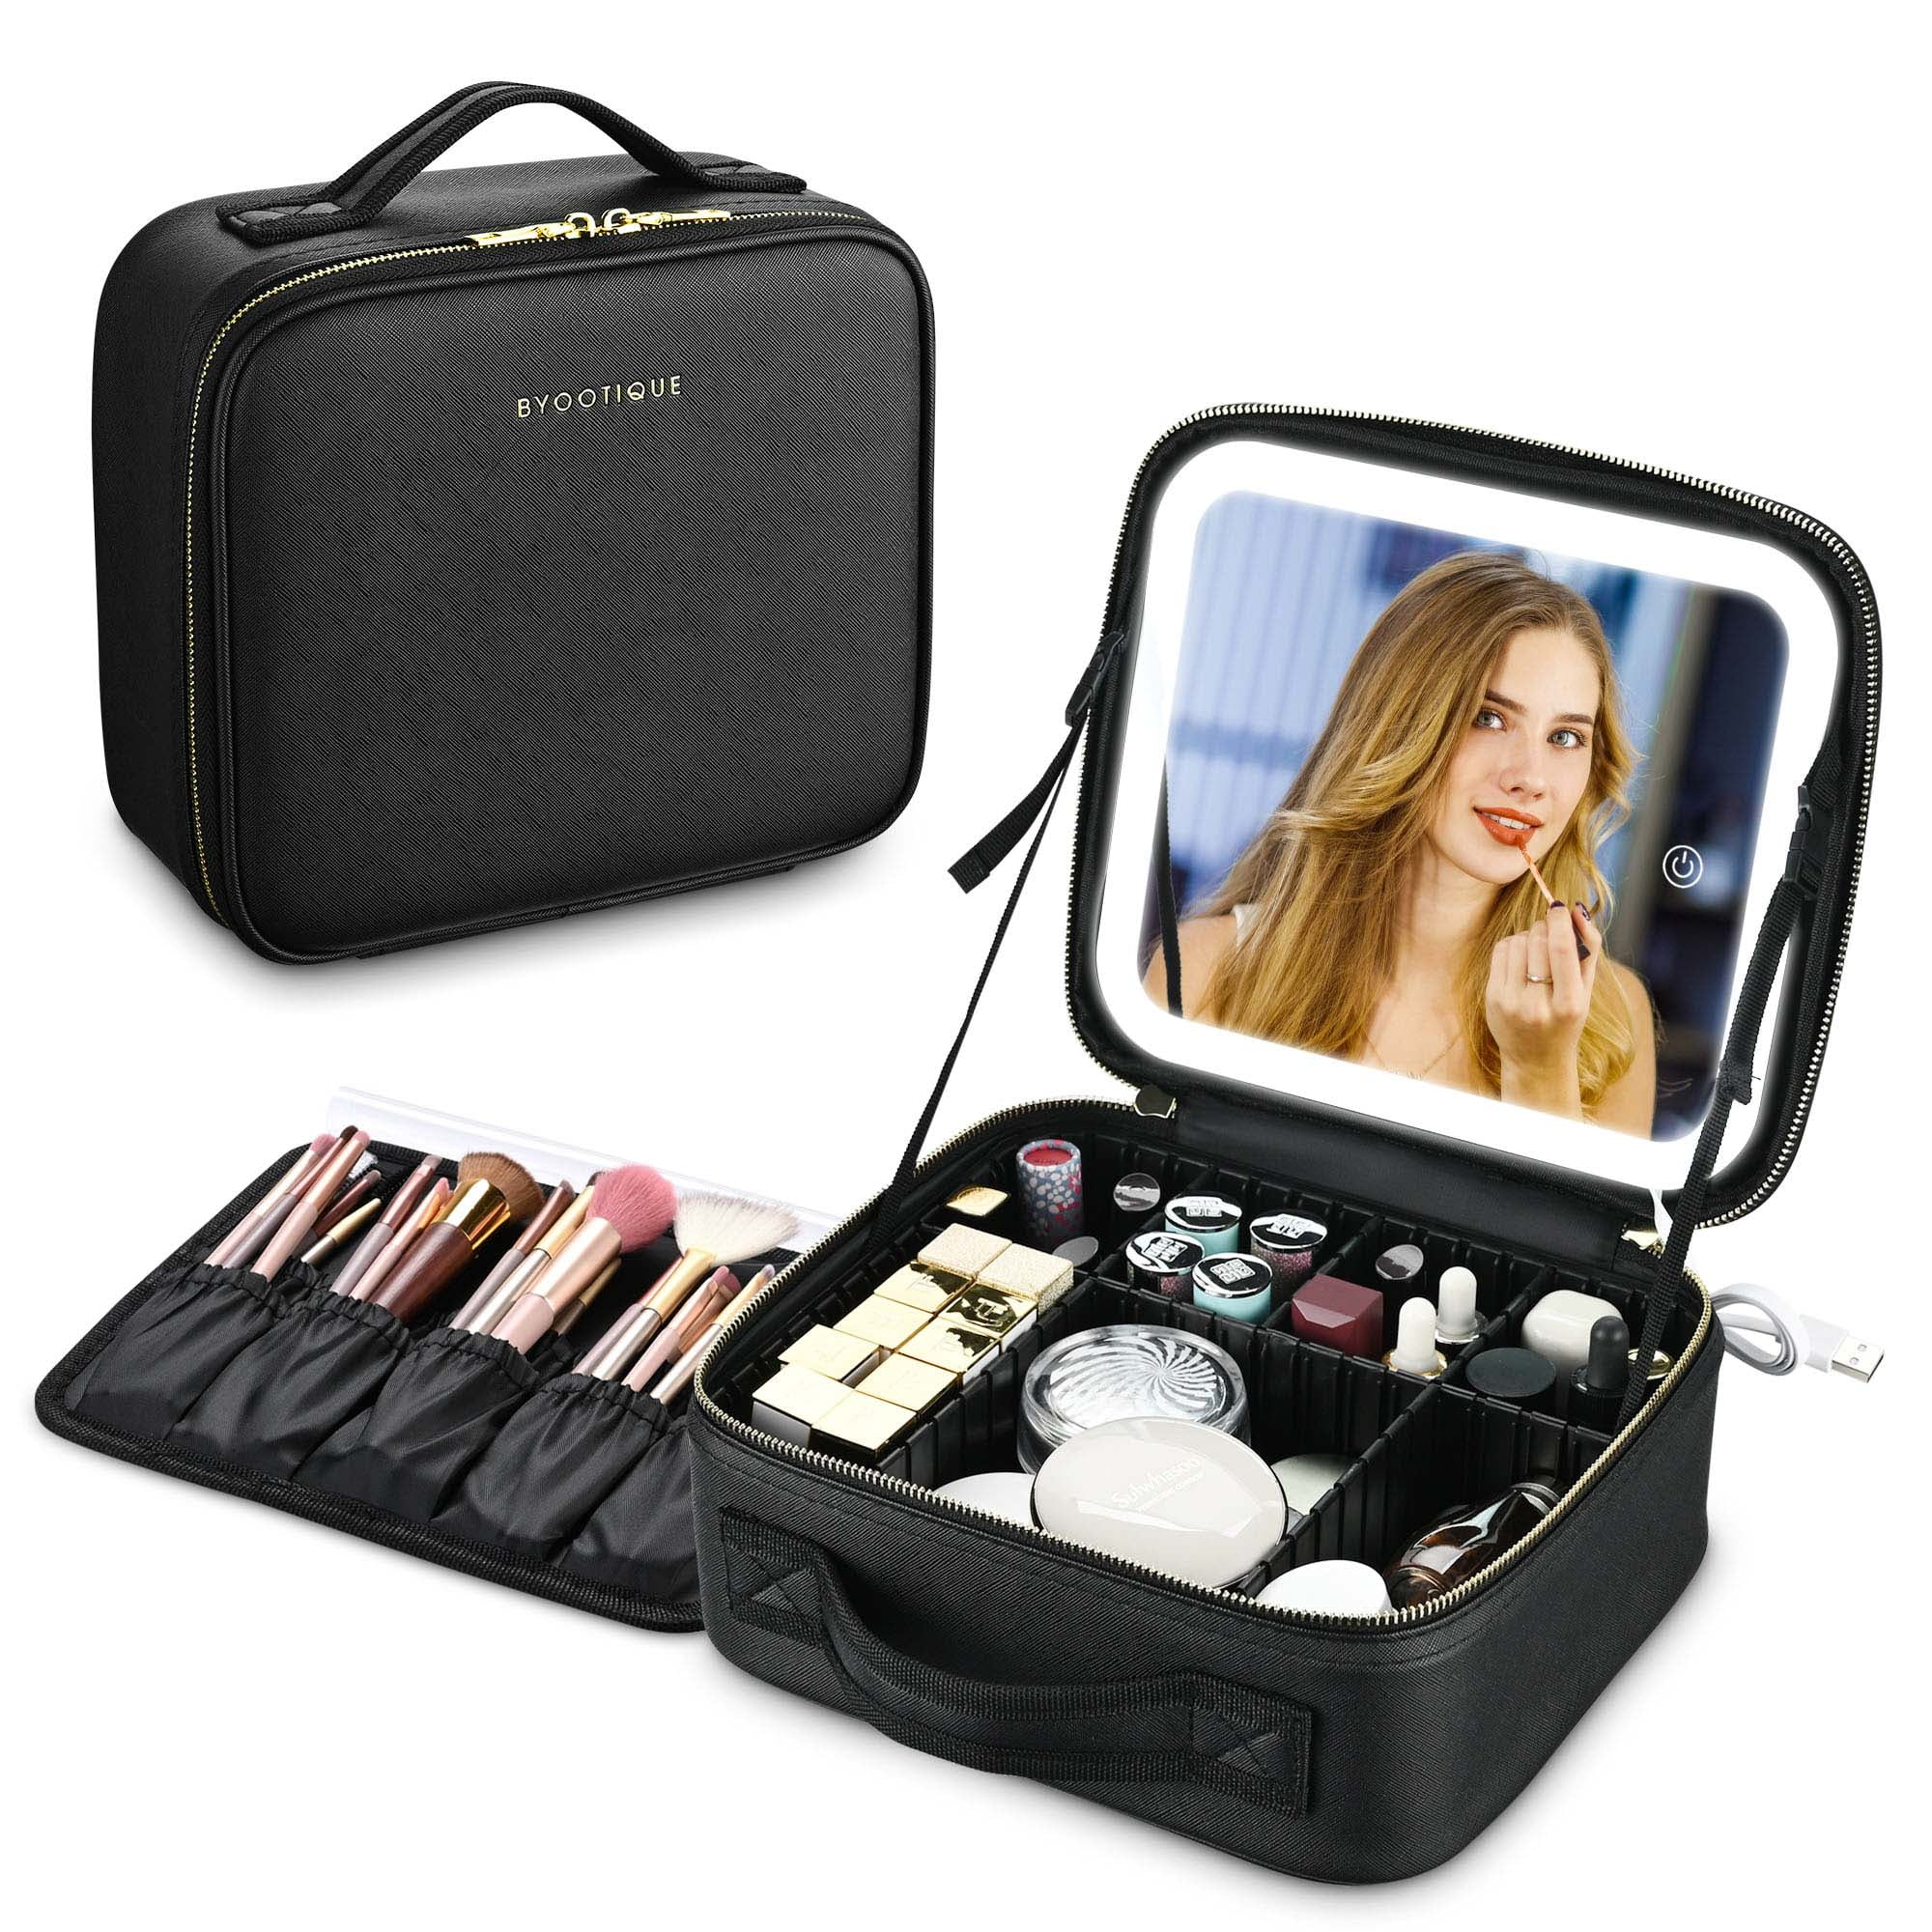 Impressions Vanity Monaco Double Zipper Cosmetic Case Leather Makeup Train Case Cosmetic Organizer for Makeup Brushes Toiletry Digital Accessories